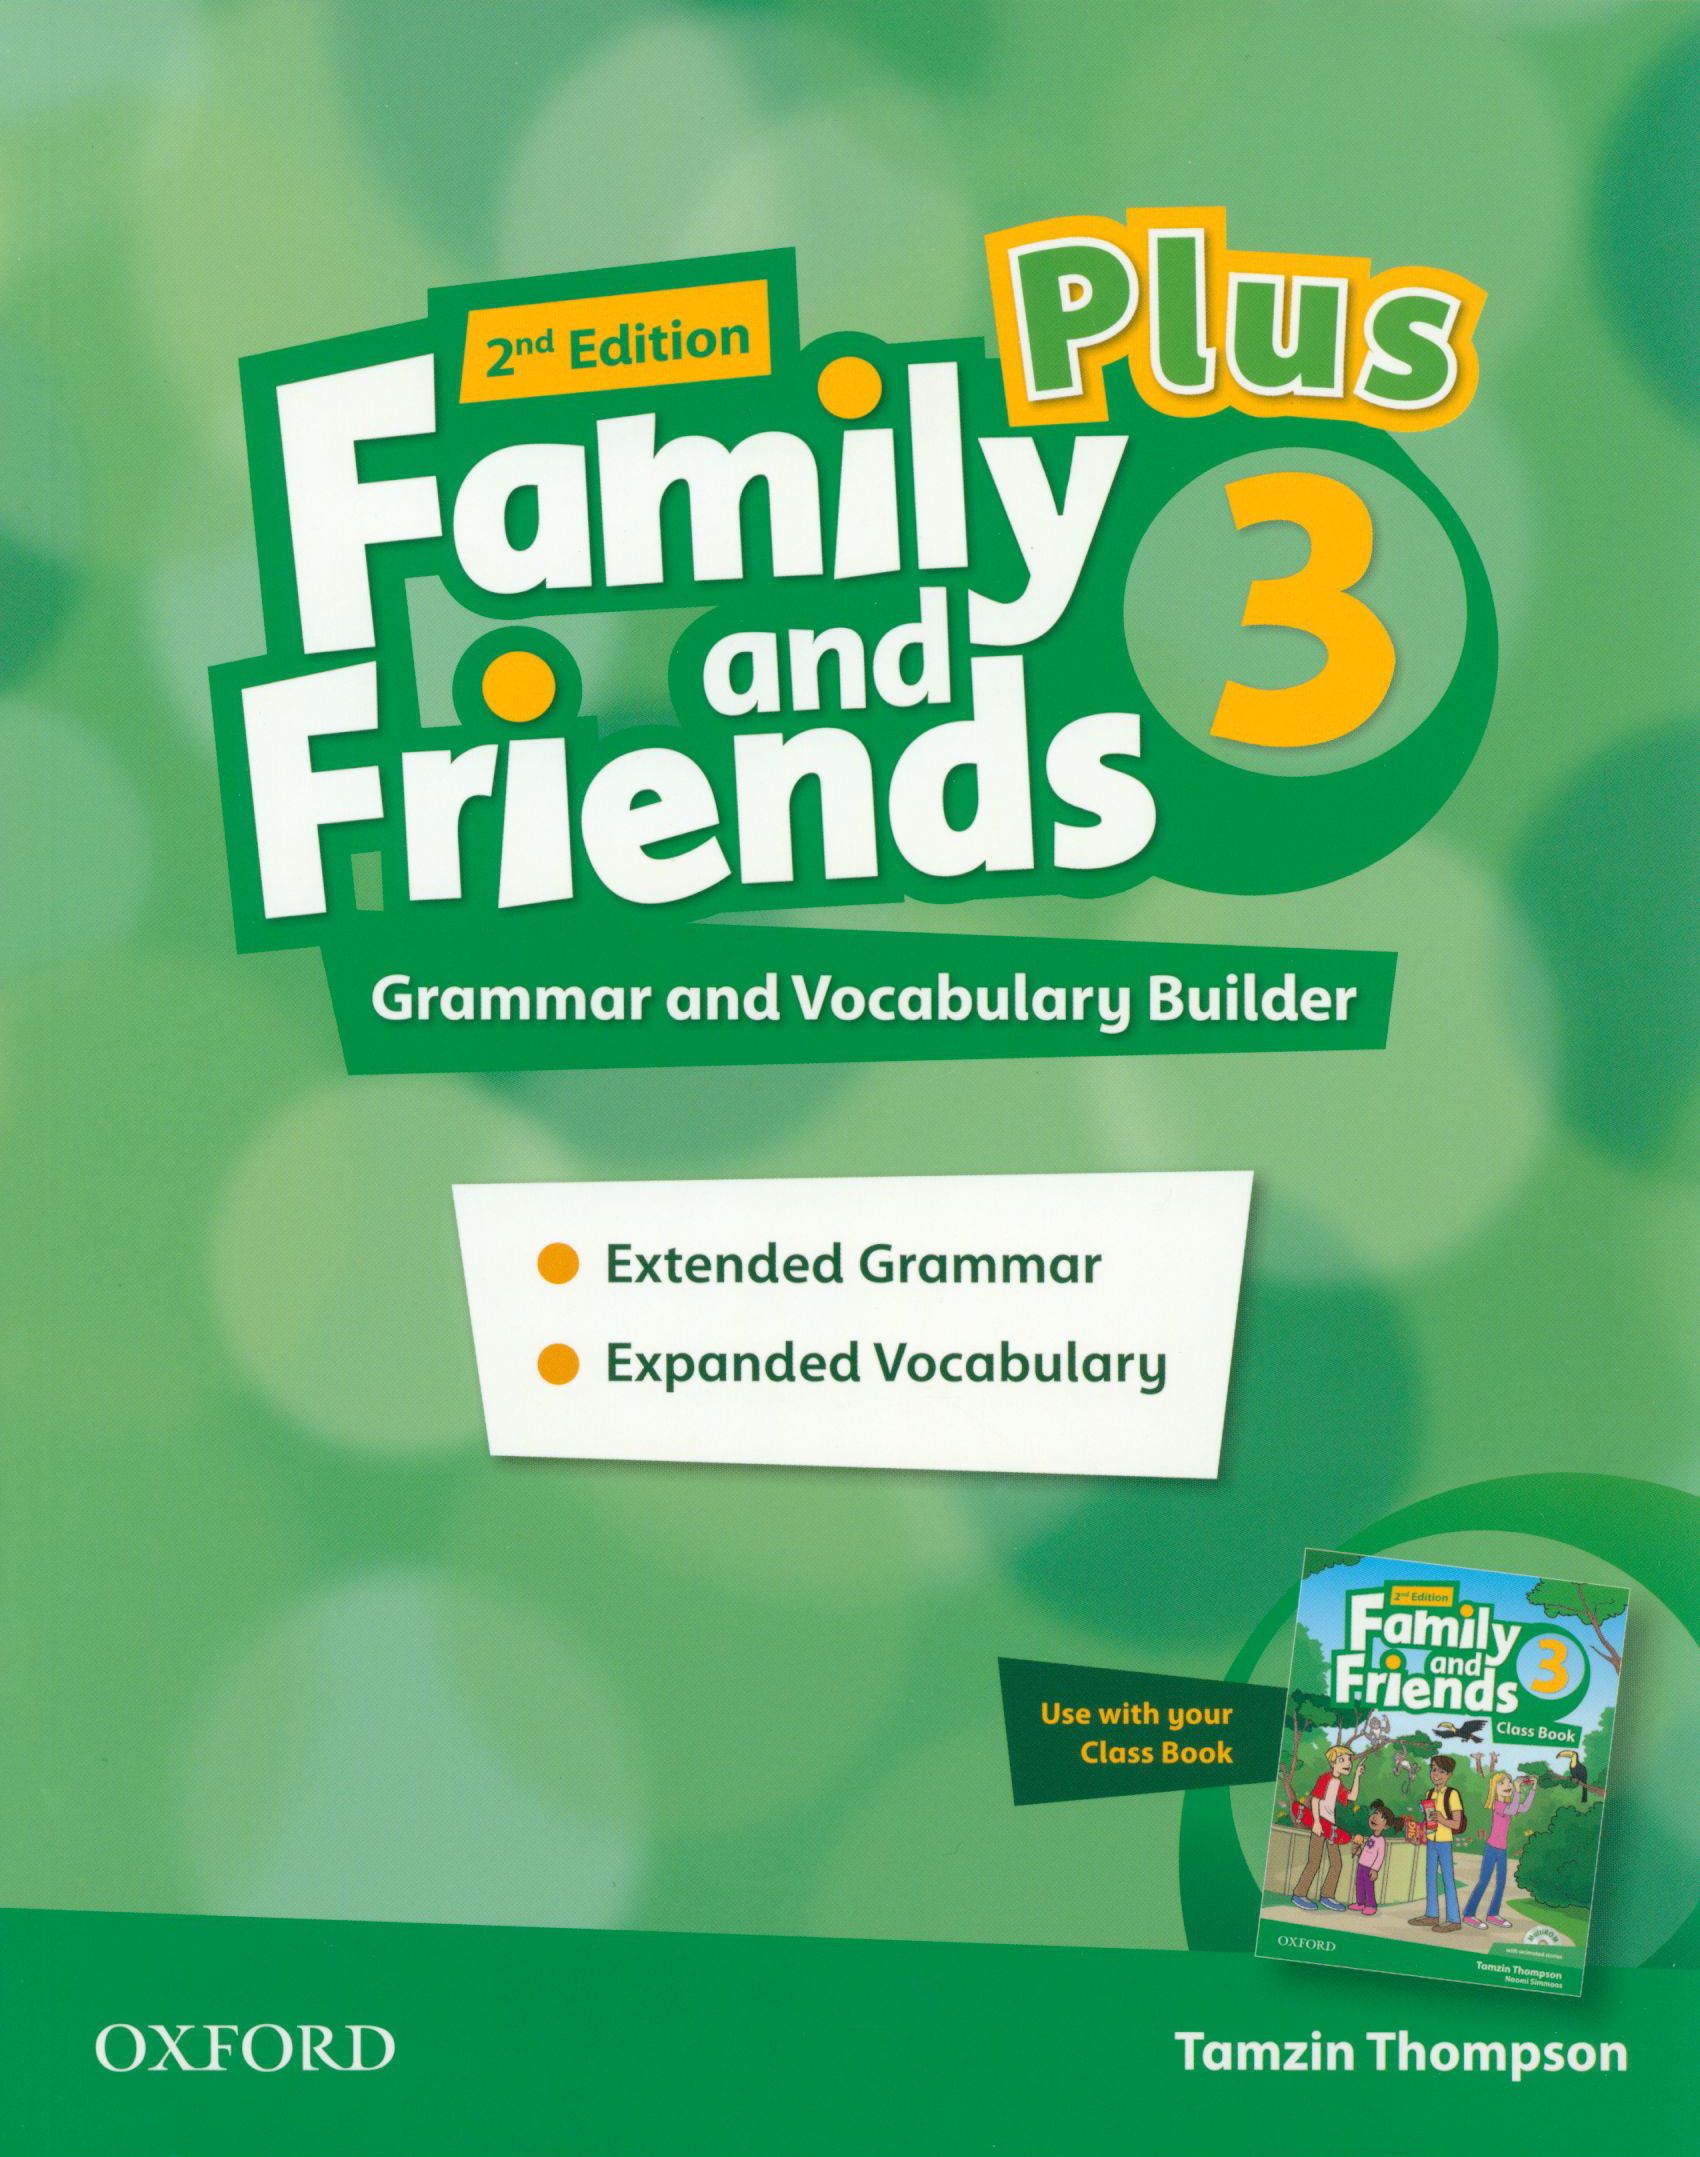 My grammar friends. Family and friends 2 (2nd Edition) комплект. Family and friends 2 2nd Edition Grammar. Family and friends 3 2nd Edition Grammar. Family and friends 1 2nd Edition Grammar.